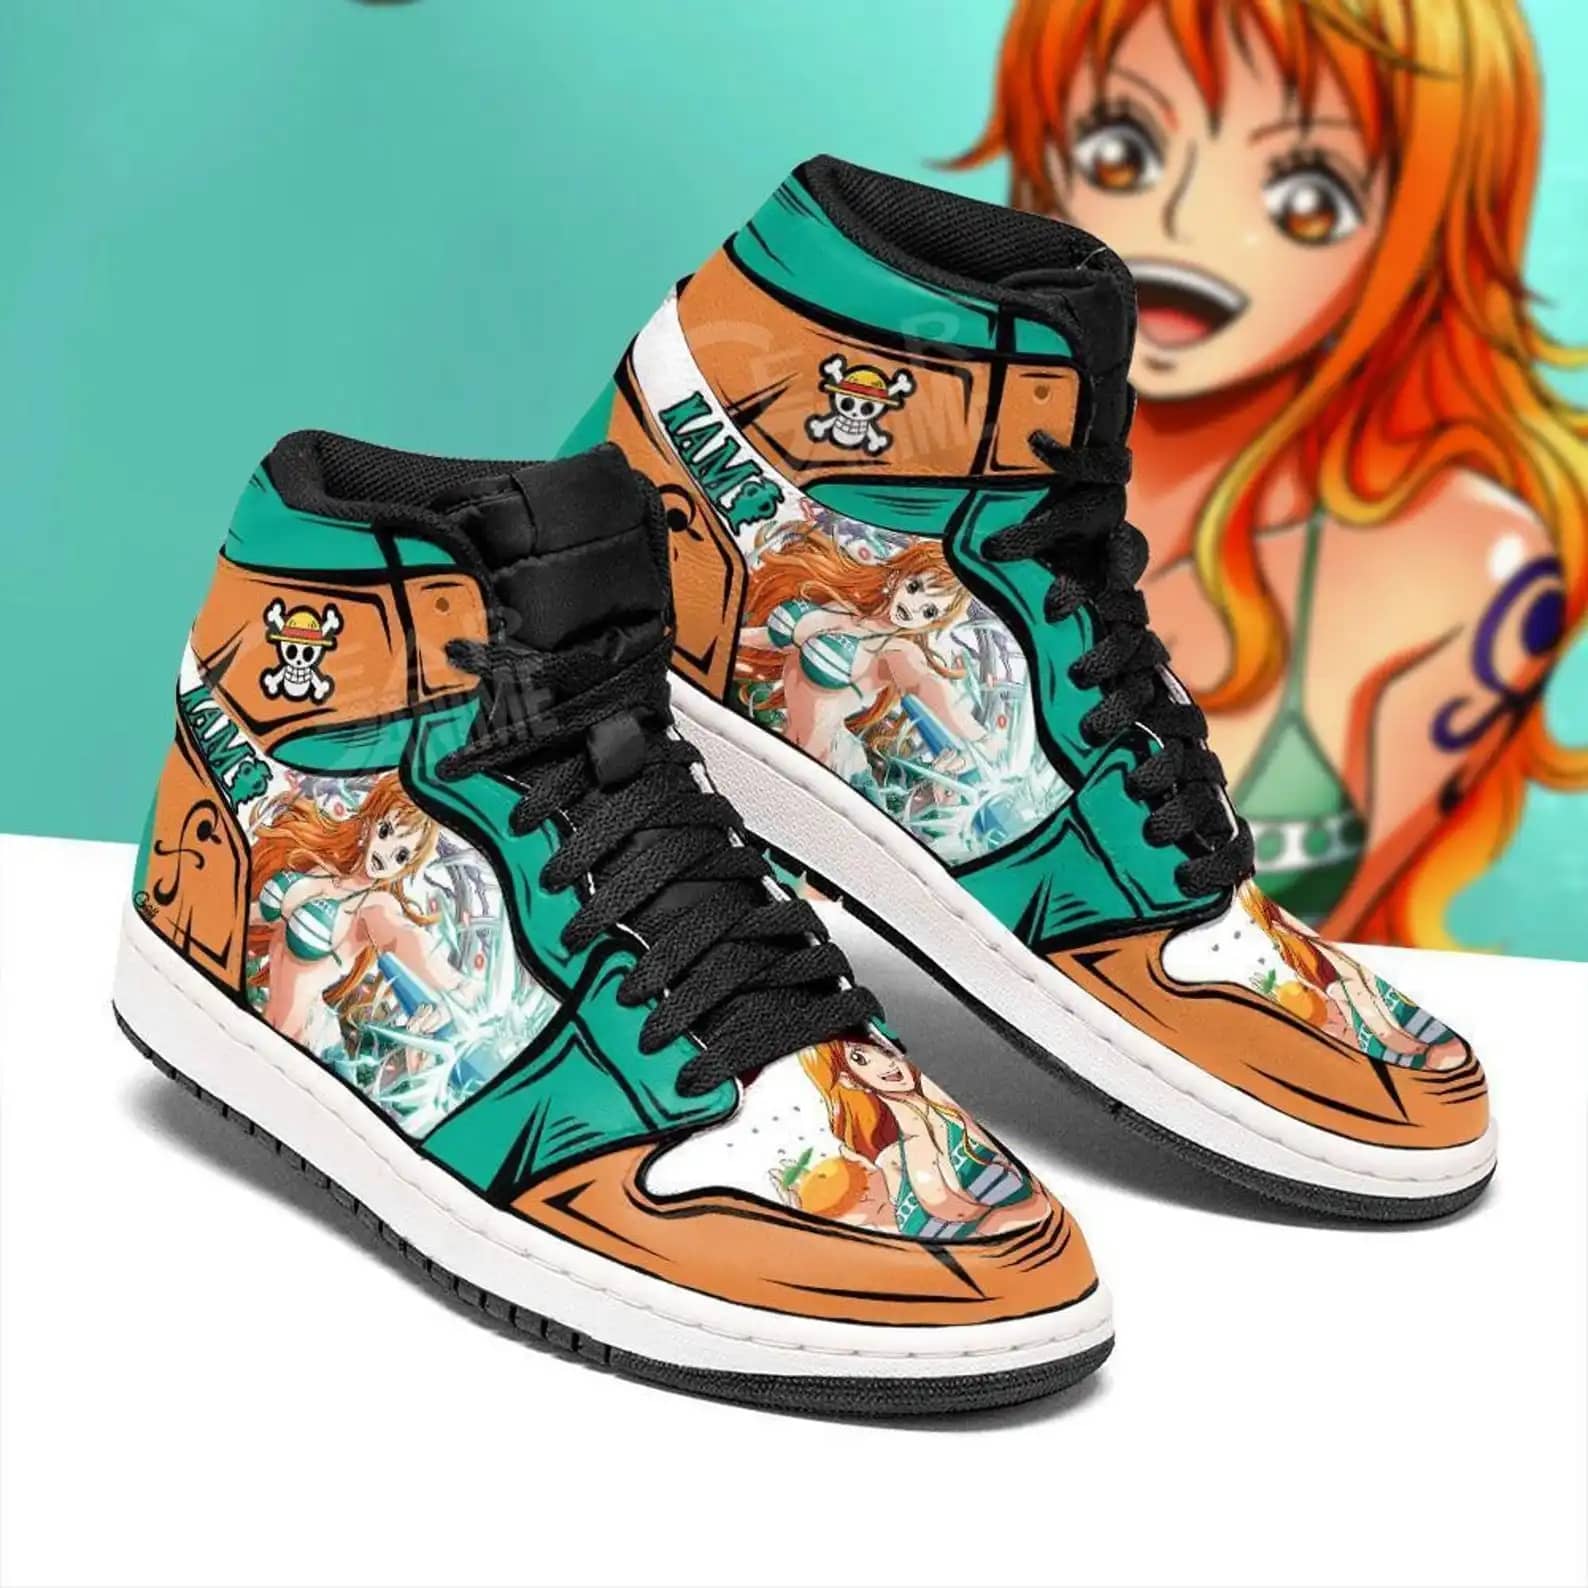 One Piece Nami For Anime Fans Custom Anime Shoes For Men And Women Air Jordan Shoes